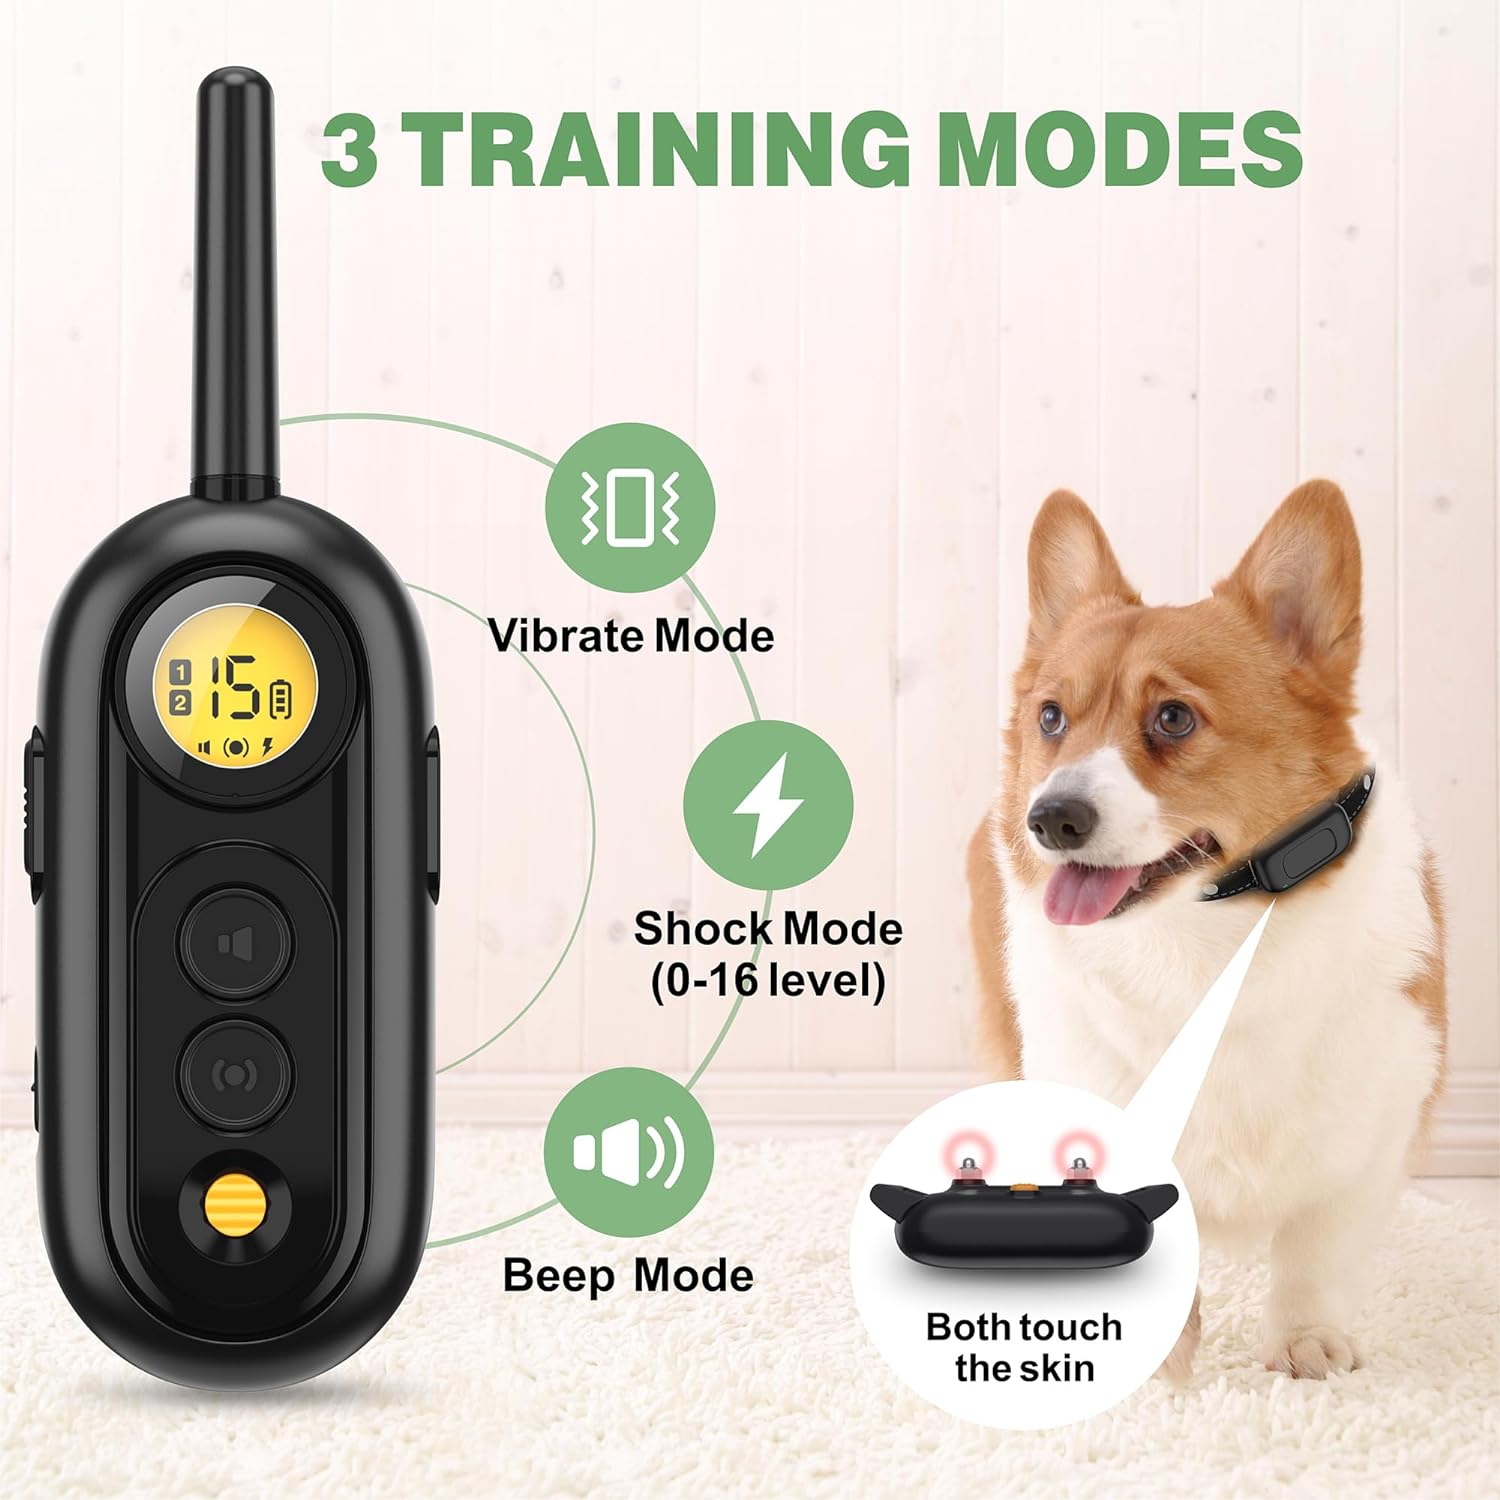 TOPDAY Dog Shock Collar -1000Ft Dog Training Collar with Remote for 5-130lbs Small Medium Dogs Rechargeable IPX7 Waterproof e Collar with 3 Training Modes Beep,Vibration(1-16),Safe Shock(Black)